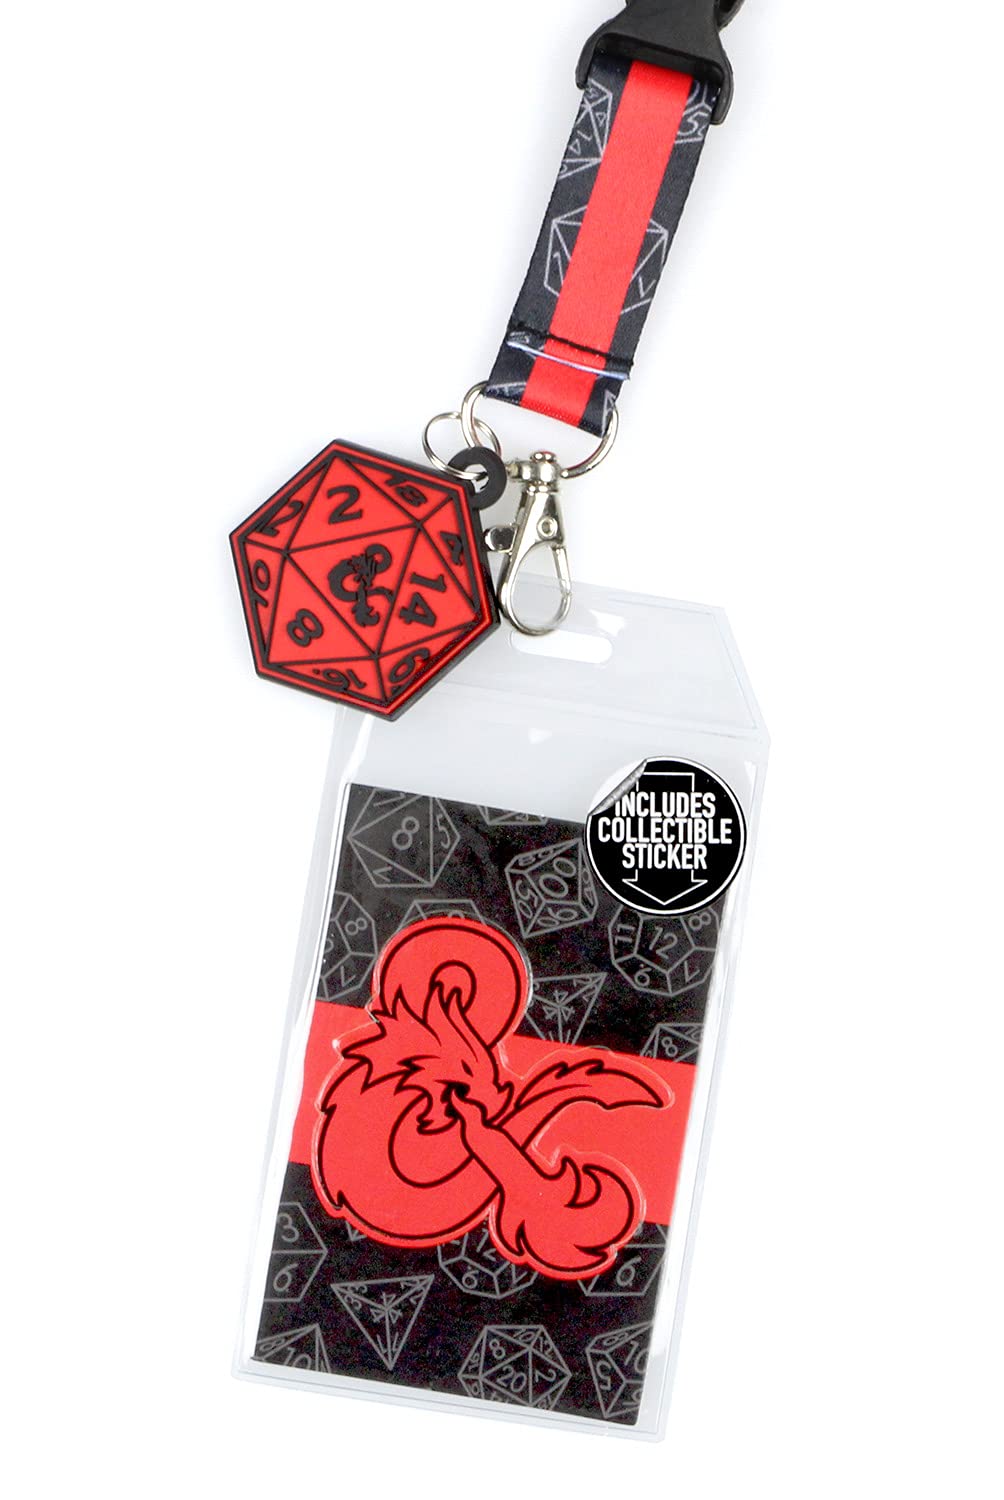 Dungeons and Dragons Logo Lanyard with D20 Dice Rubber Charm ID Badge Holder